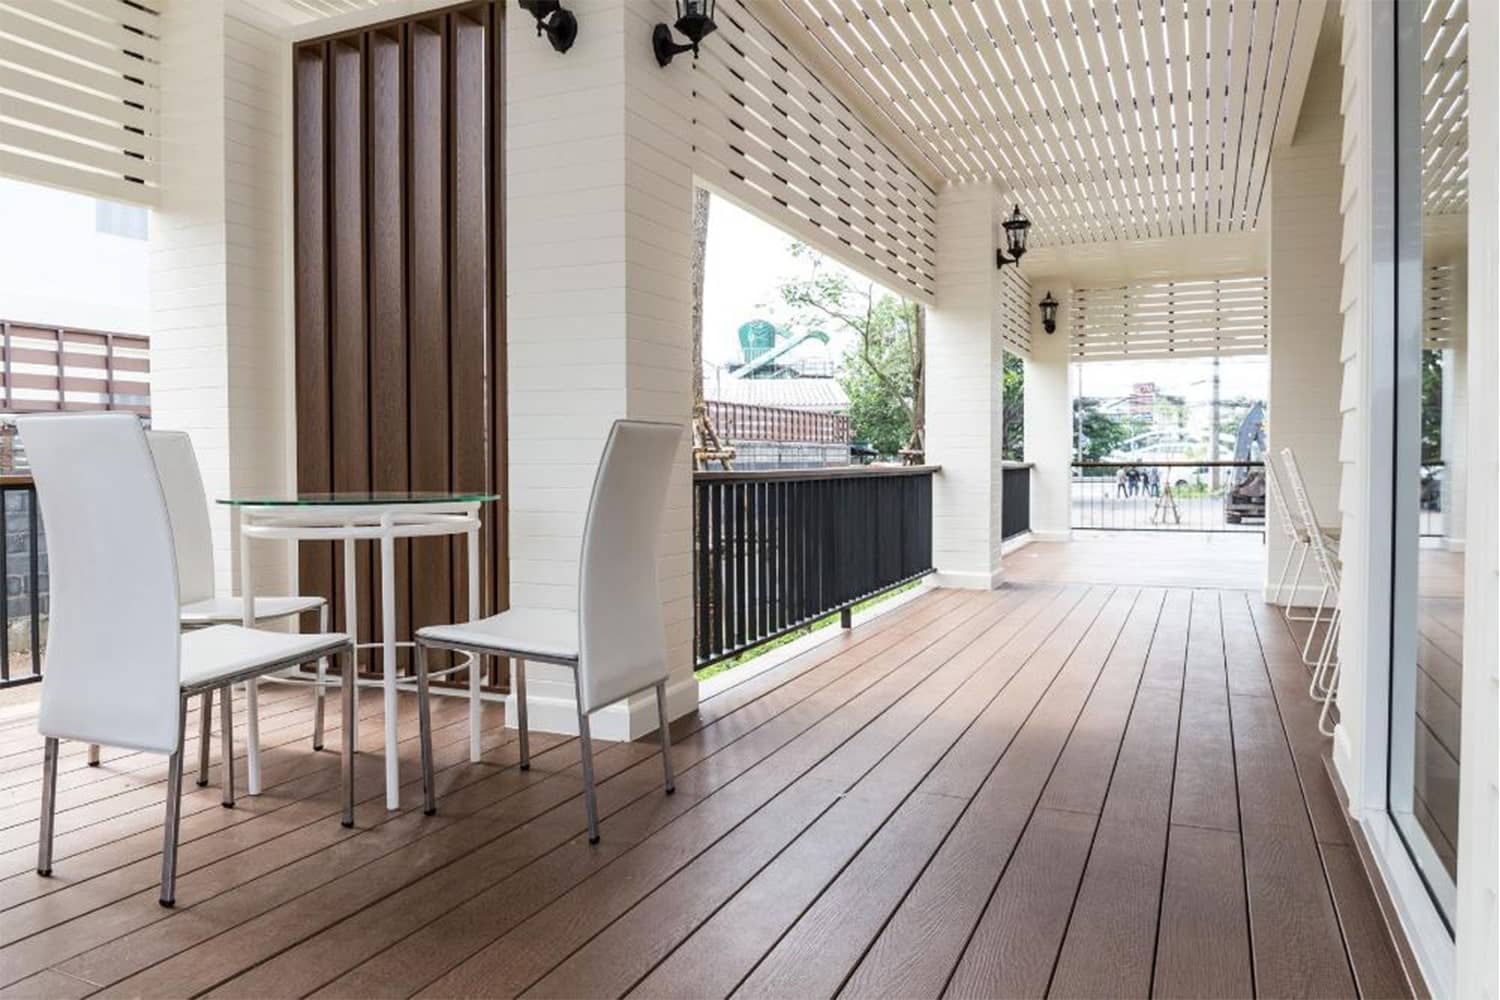 Fire rated decking on balcony area